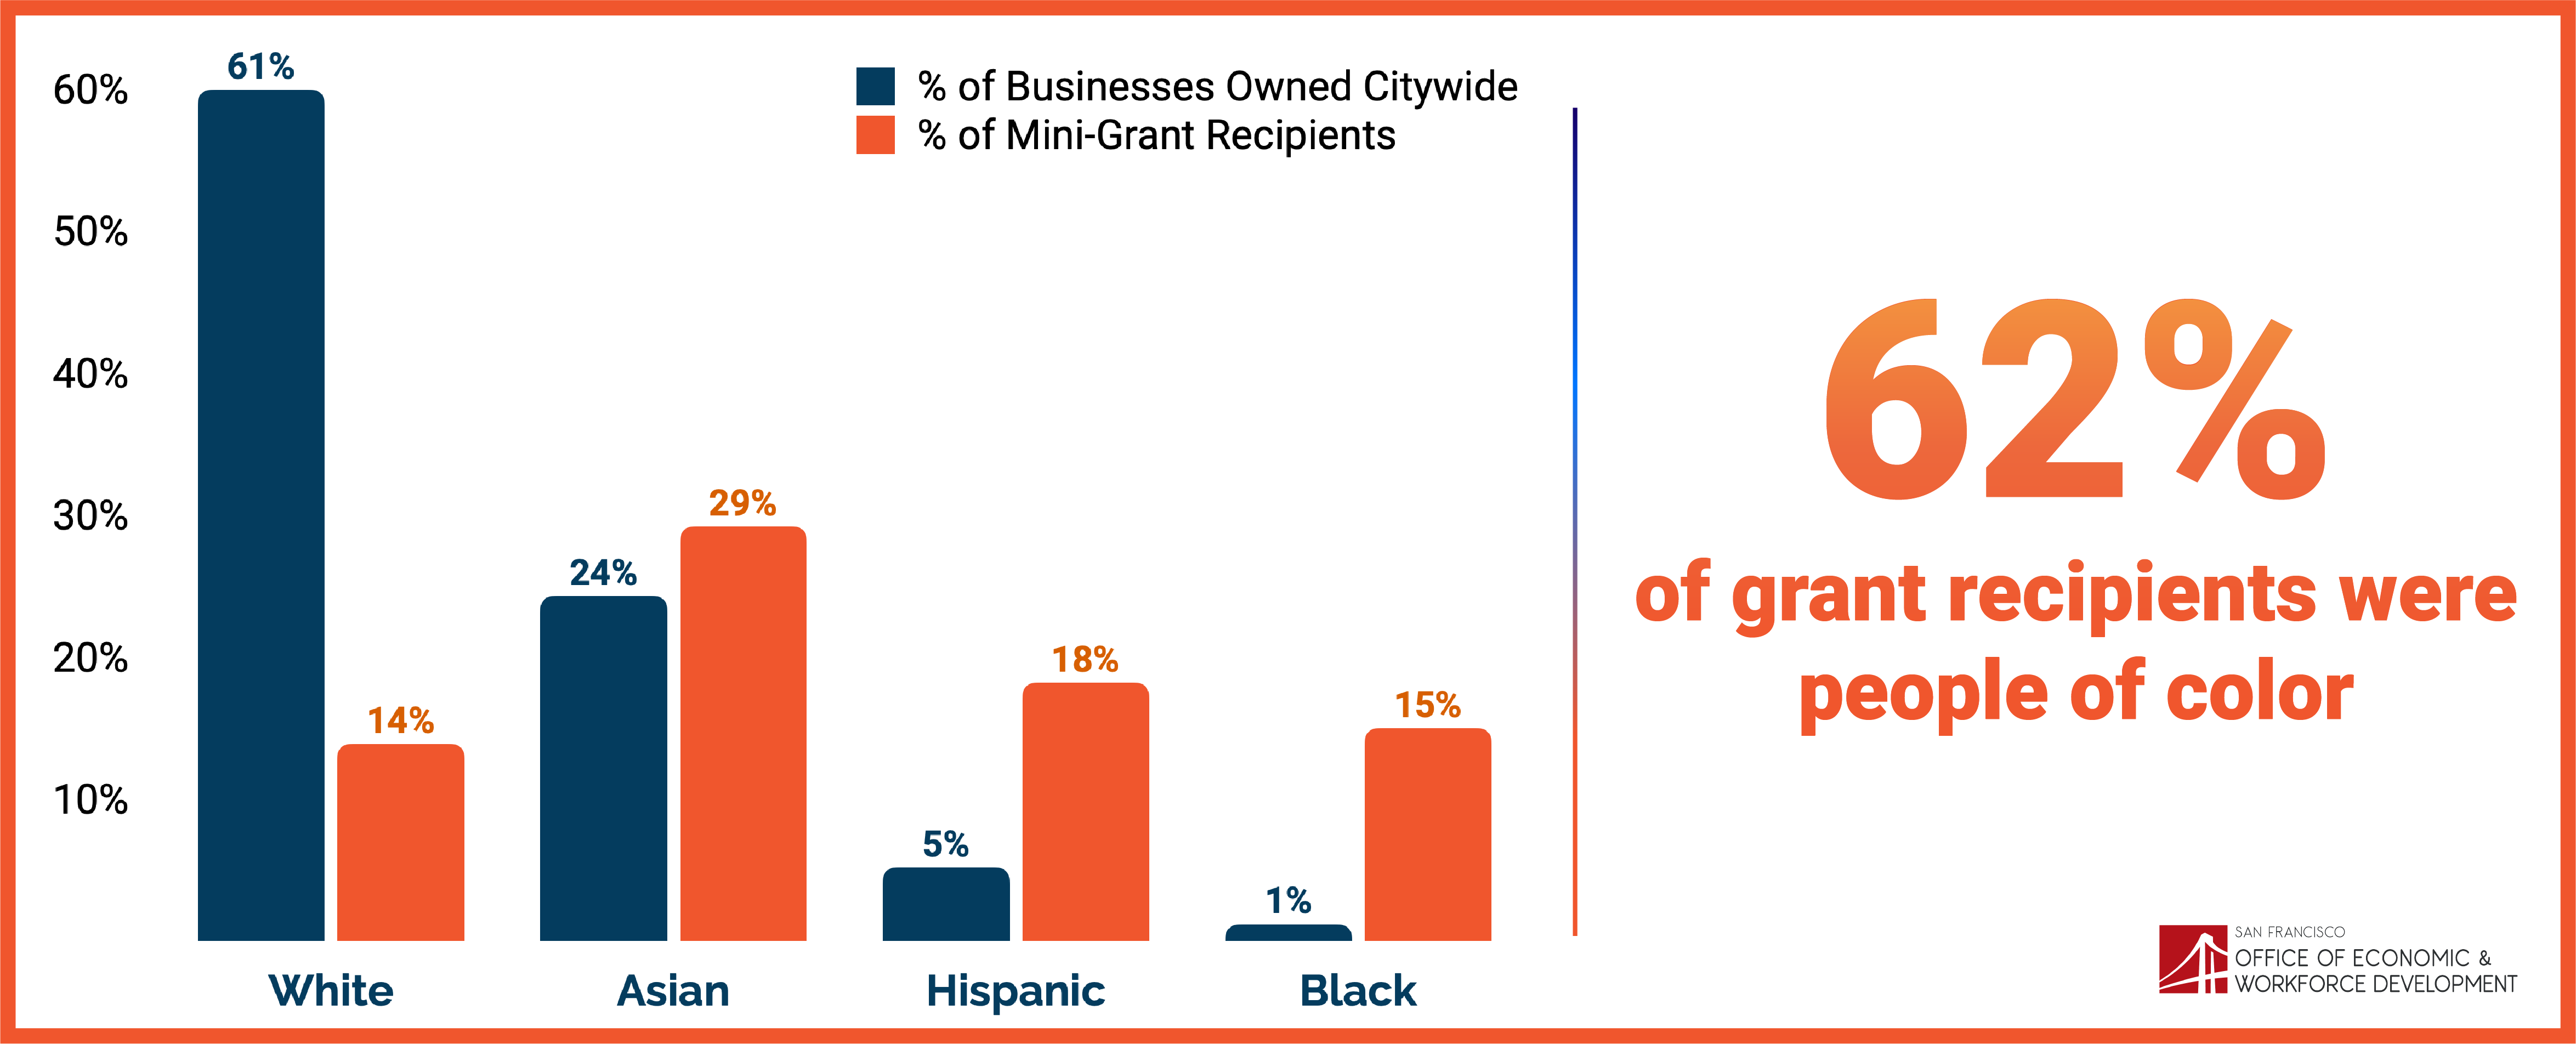 62% of recipients of OEWD's Neighborhood Mini-grants program were businesses owned by people of color